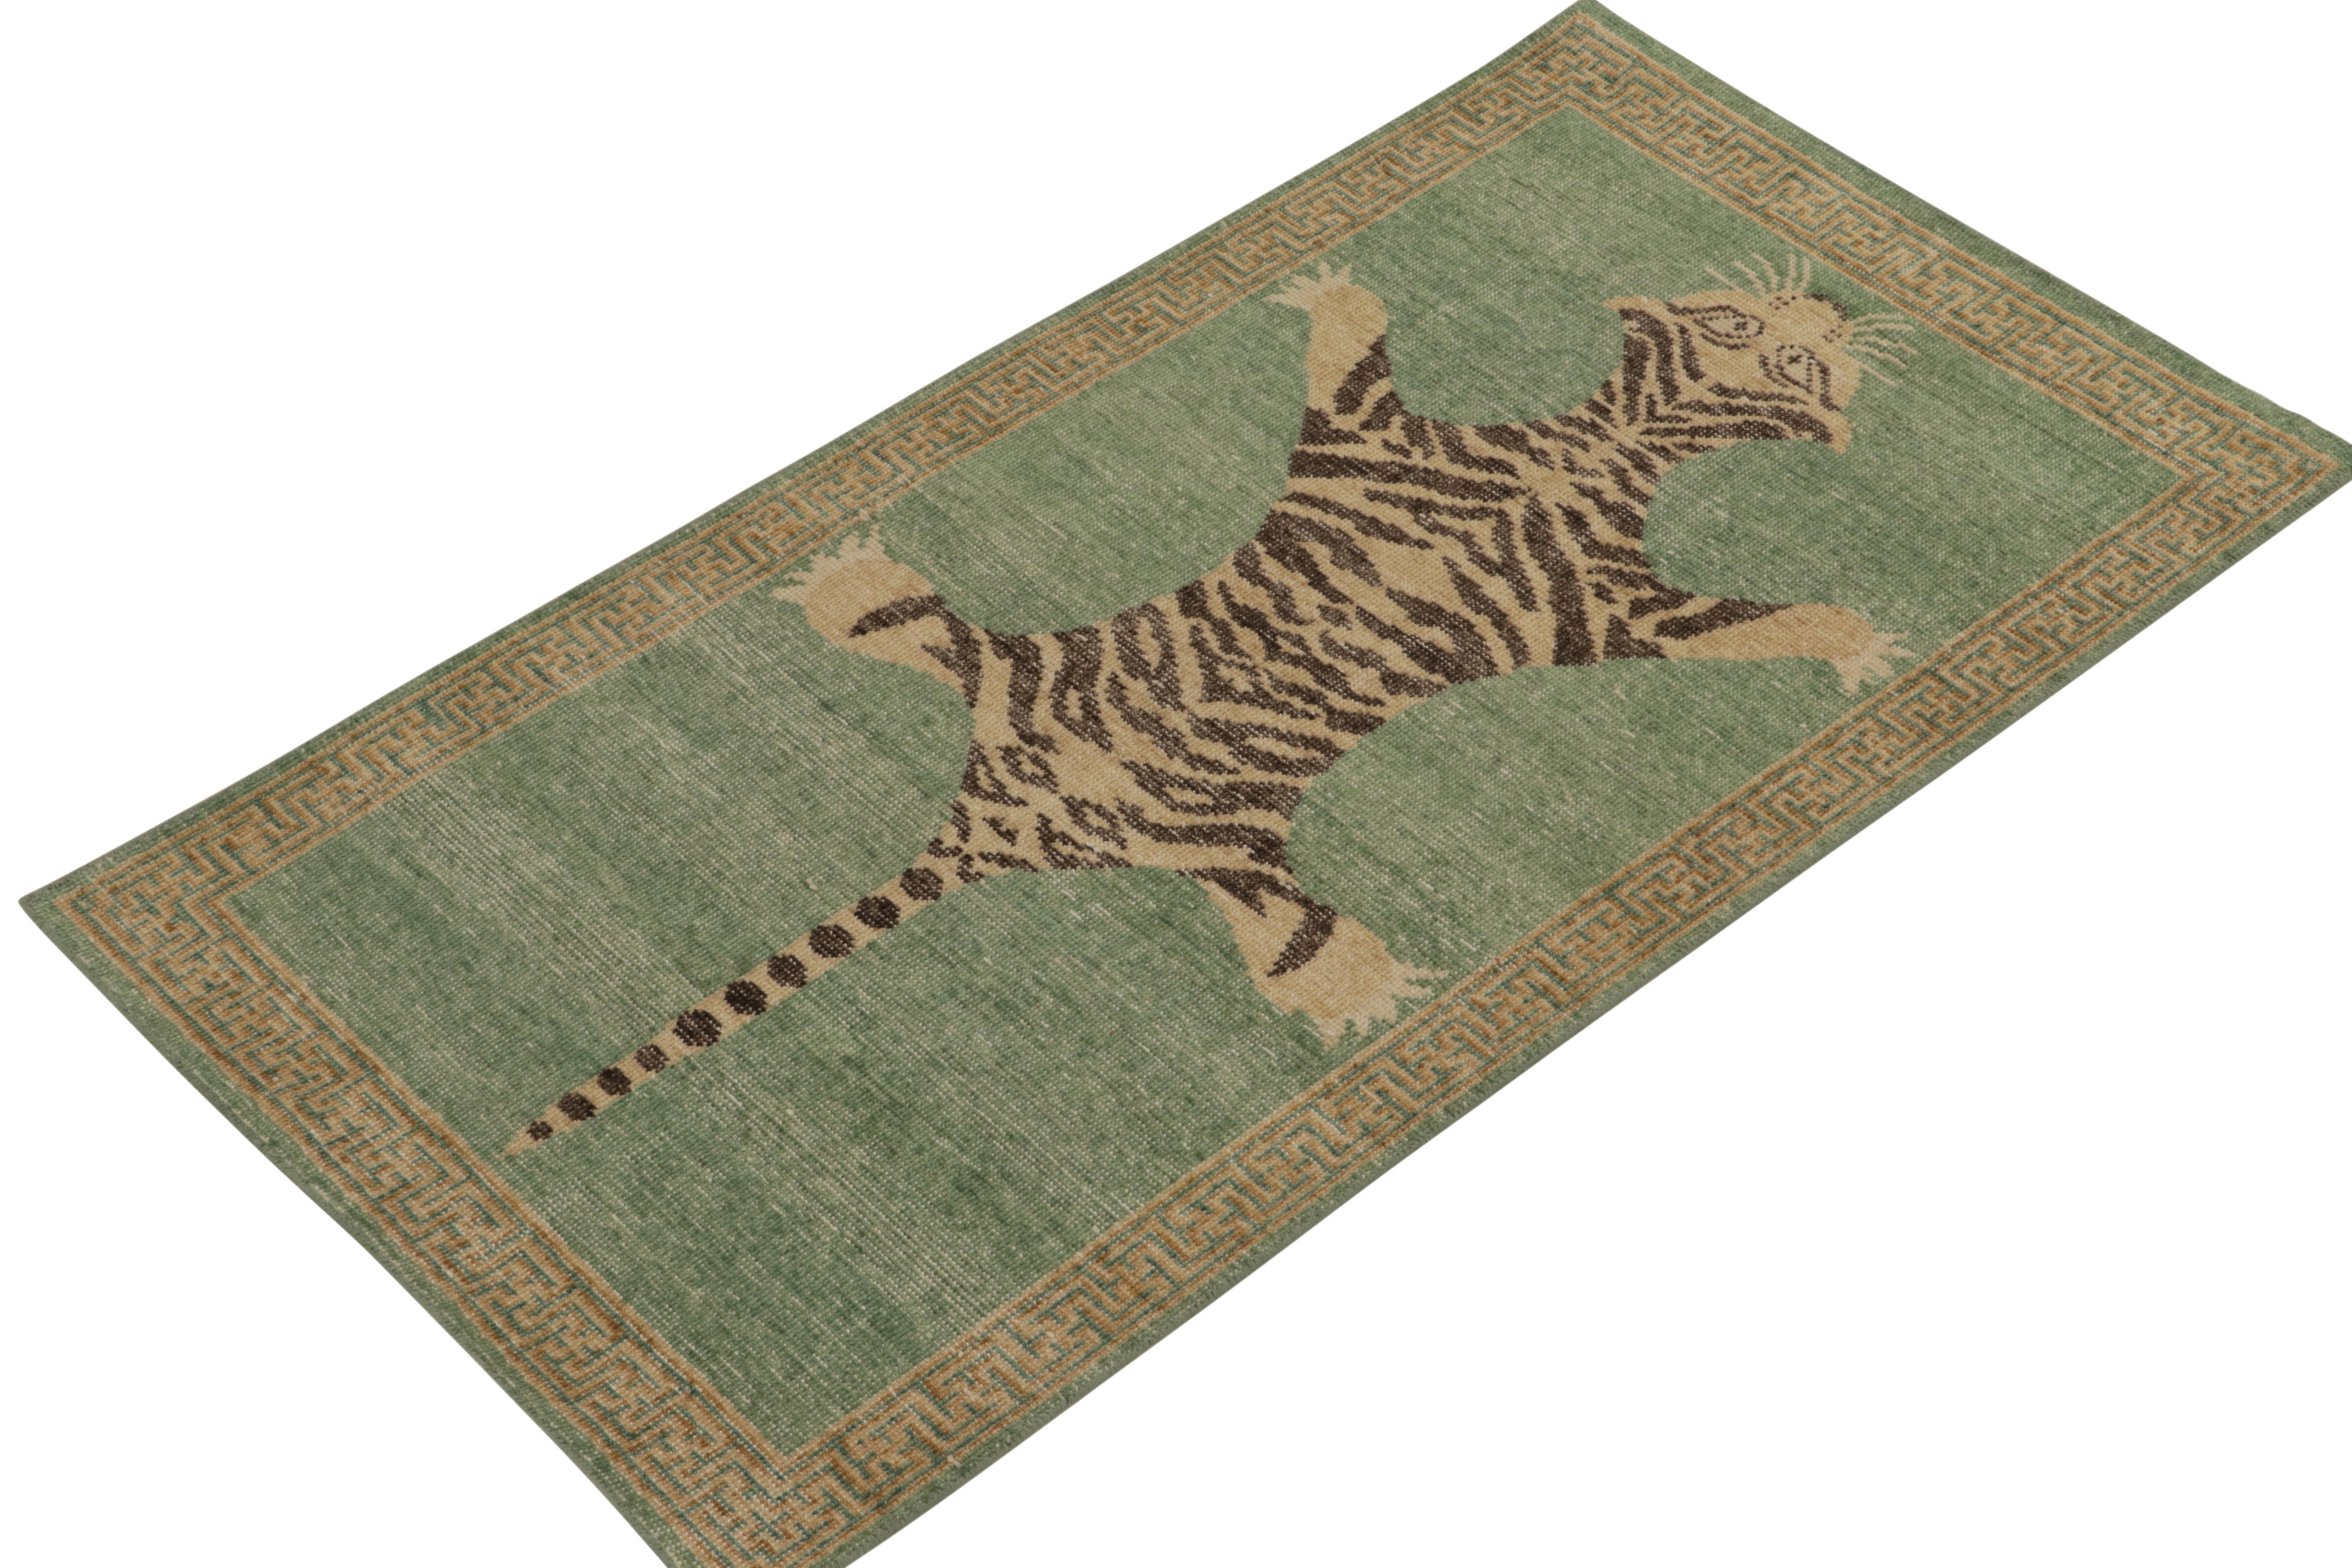 From Rug & Kilim’s Homage Collection, a 3x6 hand-knotted wool piece recapturing the time-honored Tiger skin rug in its glory. 

On the design: This piece is inspired by antique Indian Tiger-skin rugs of the most regal, inviting presence. Tones of